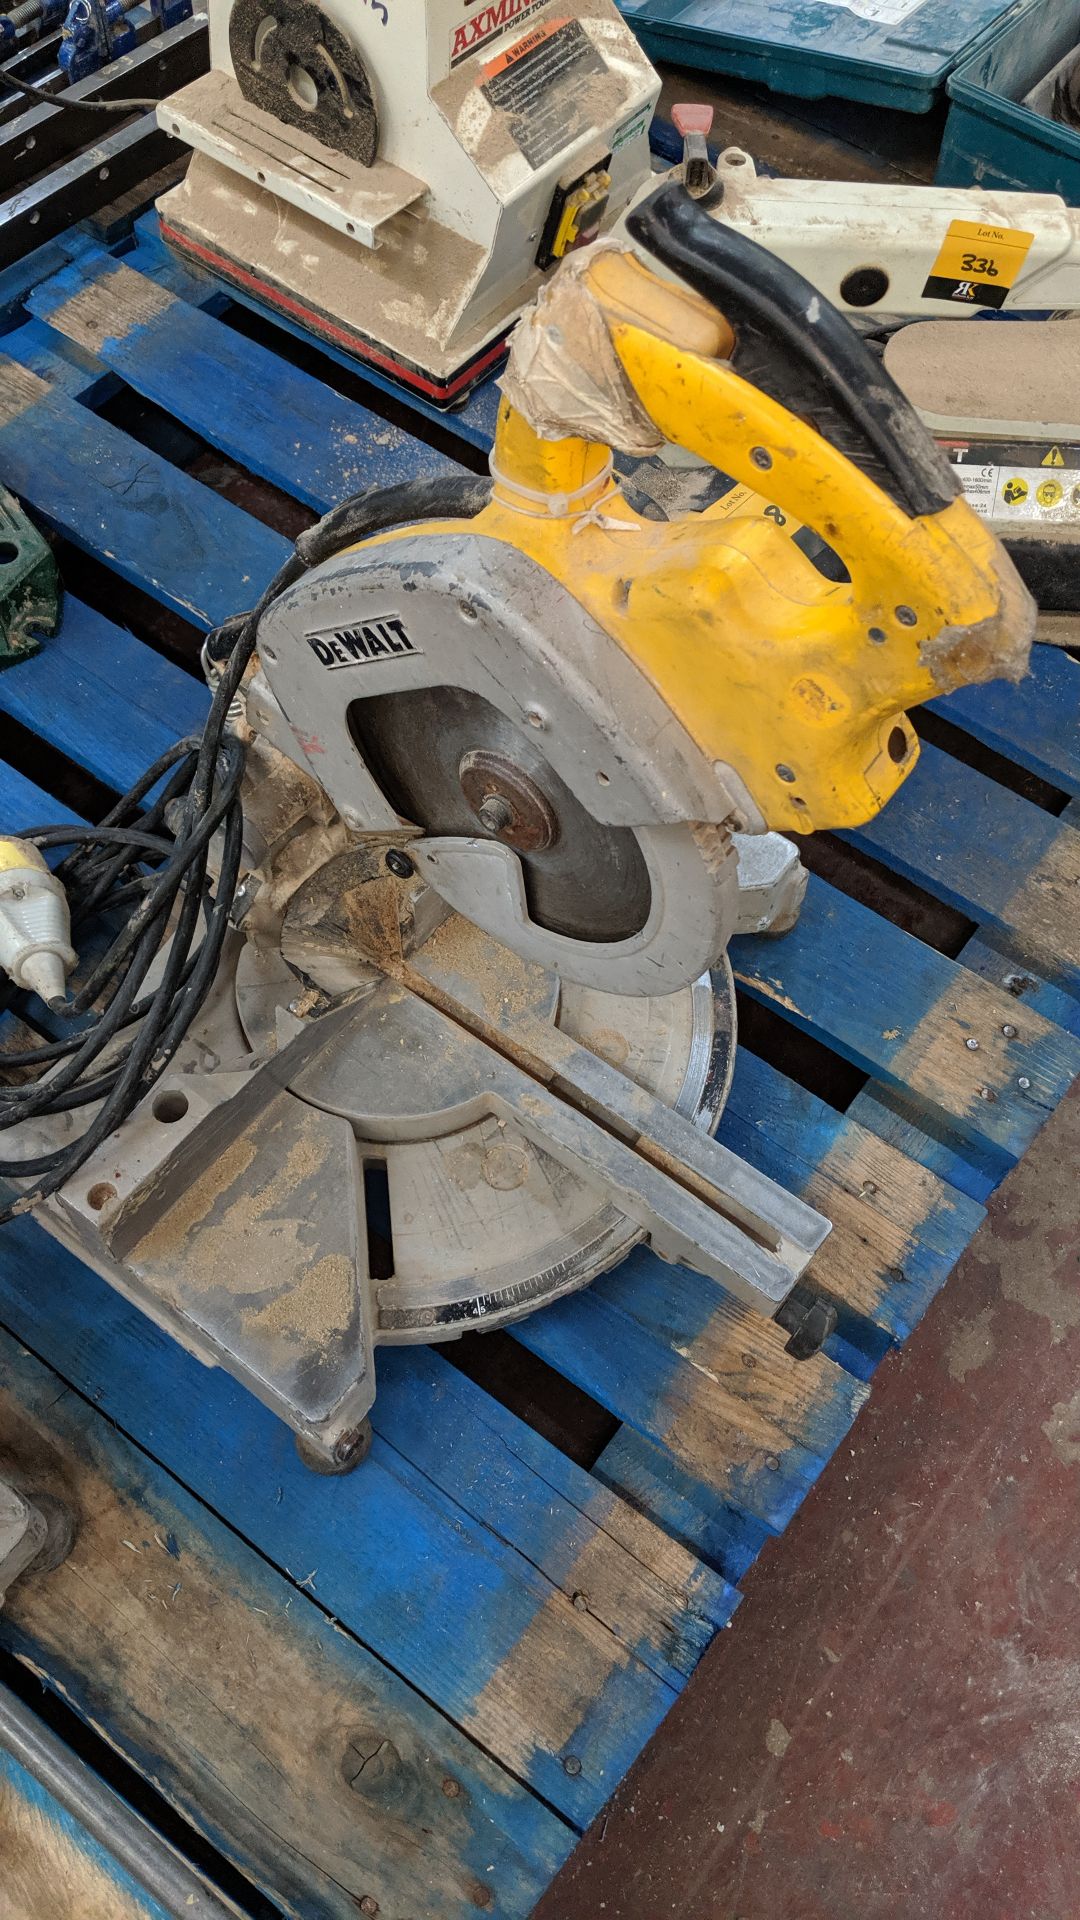 DeWalt 110V mitre saw IMPORTANT: Please remember goods successfully bid upon must be paid for and - Image 2 of 5